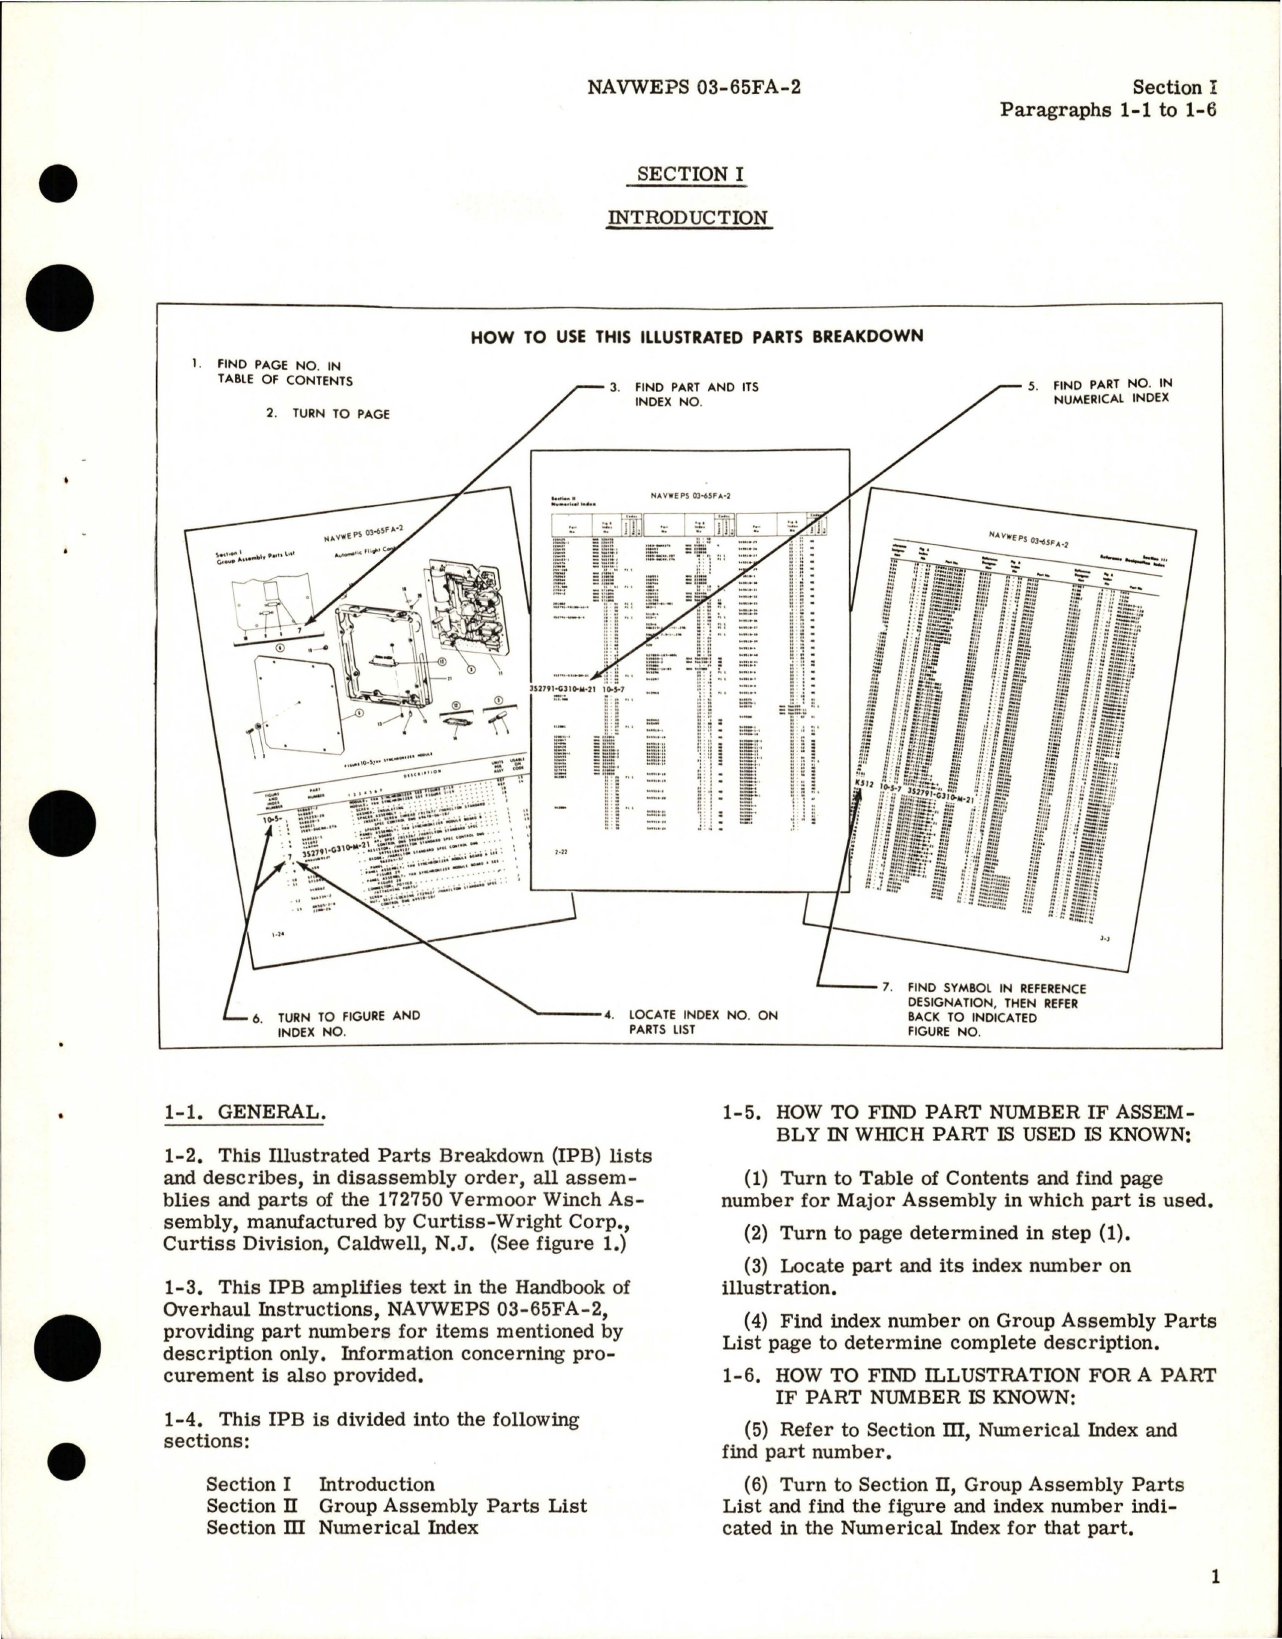 Sample page 5 from AirCorps Library document: Illustrated Parts Breakdown for Vermoor Winch Assembly - Part 172750